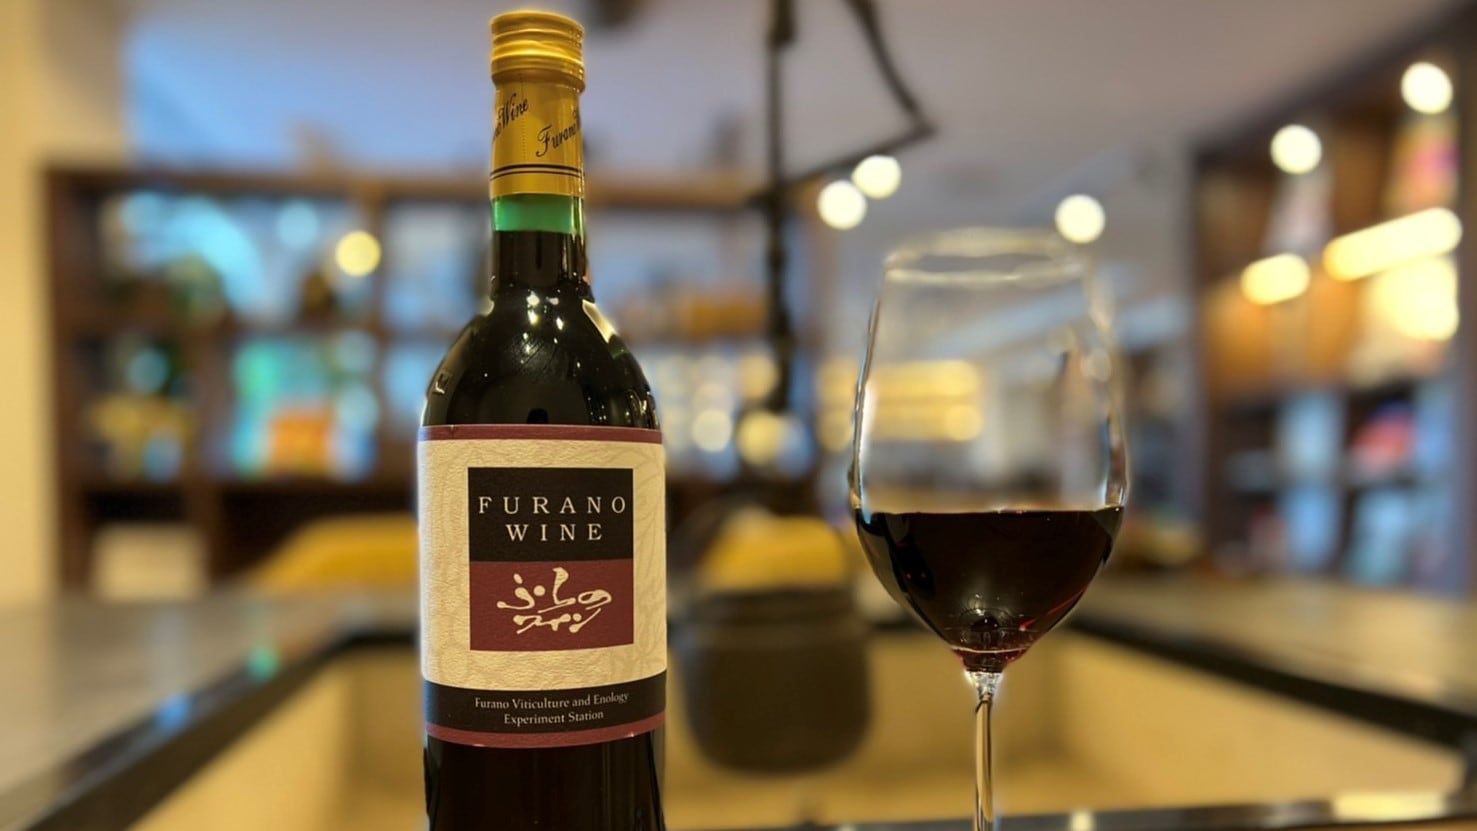 [Lounge free service] Furano wine red until 21:00